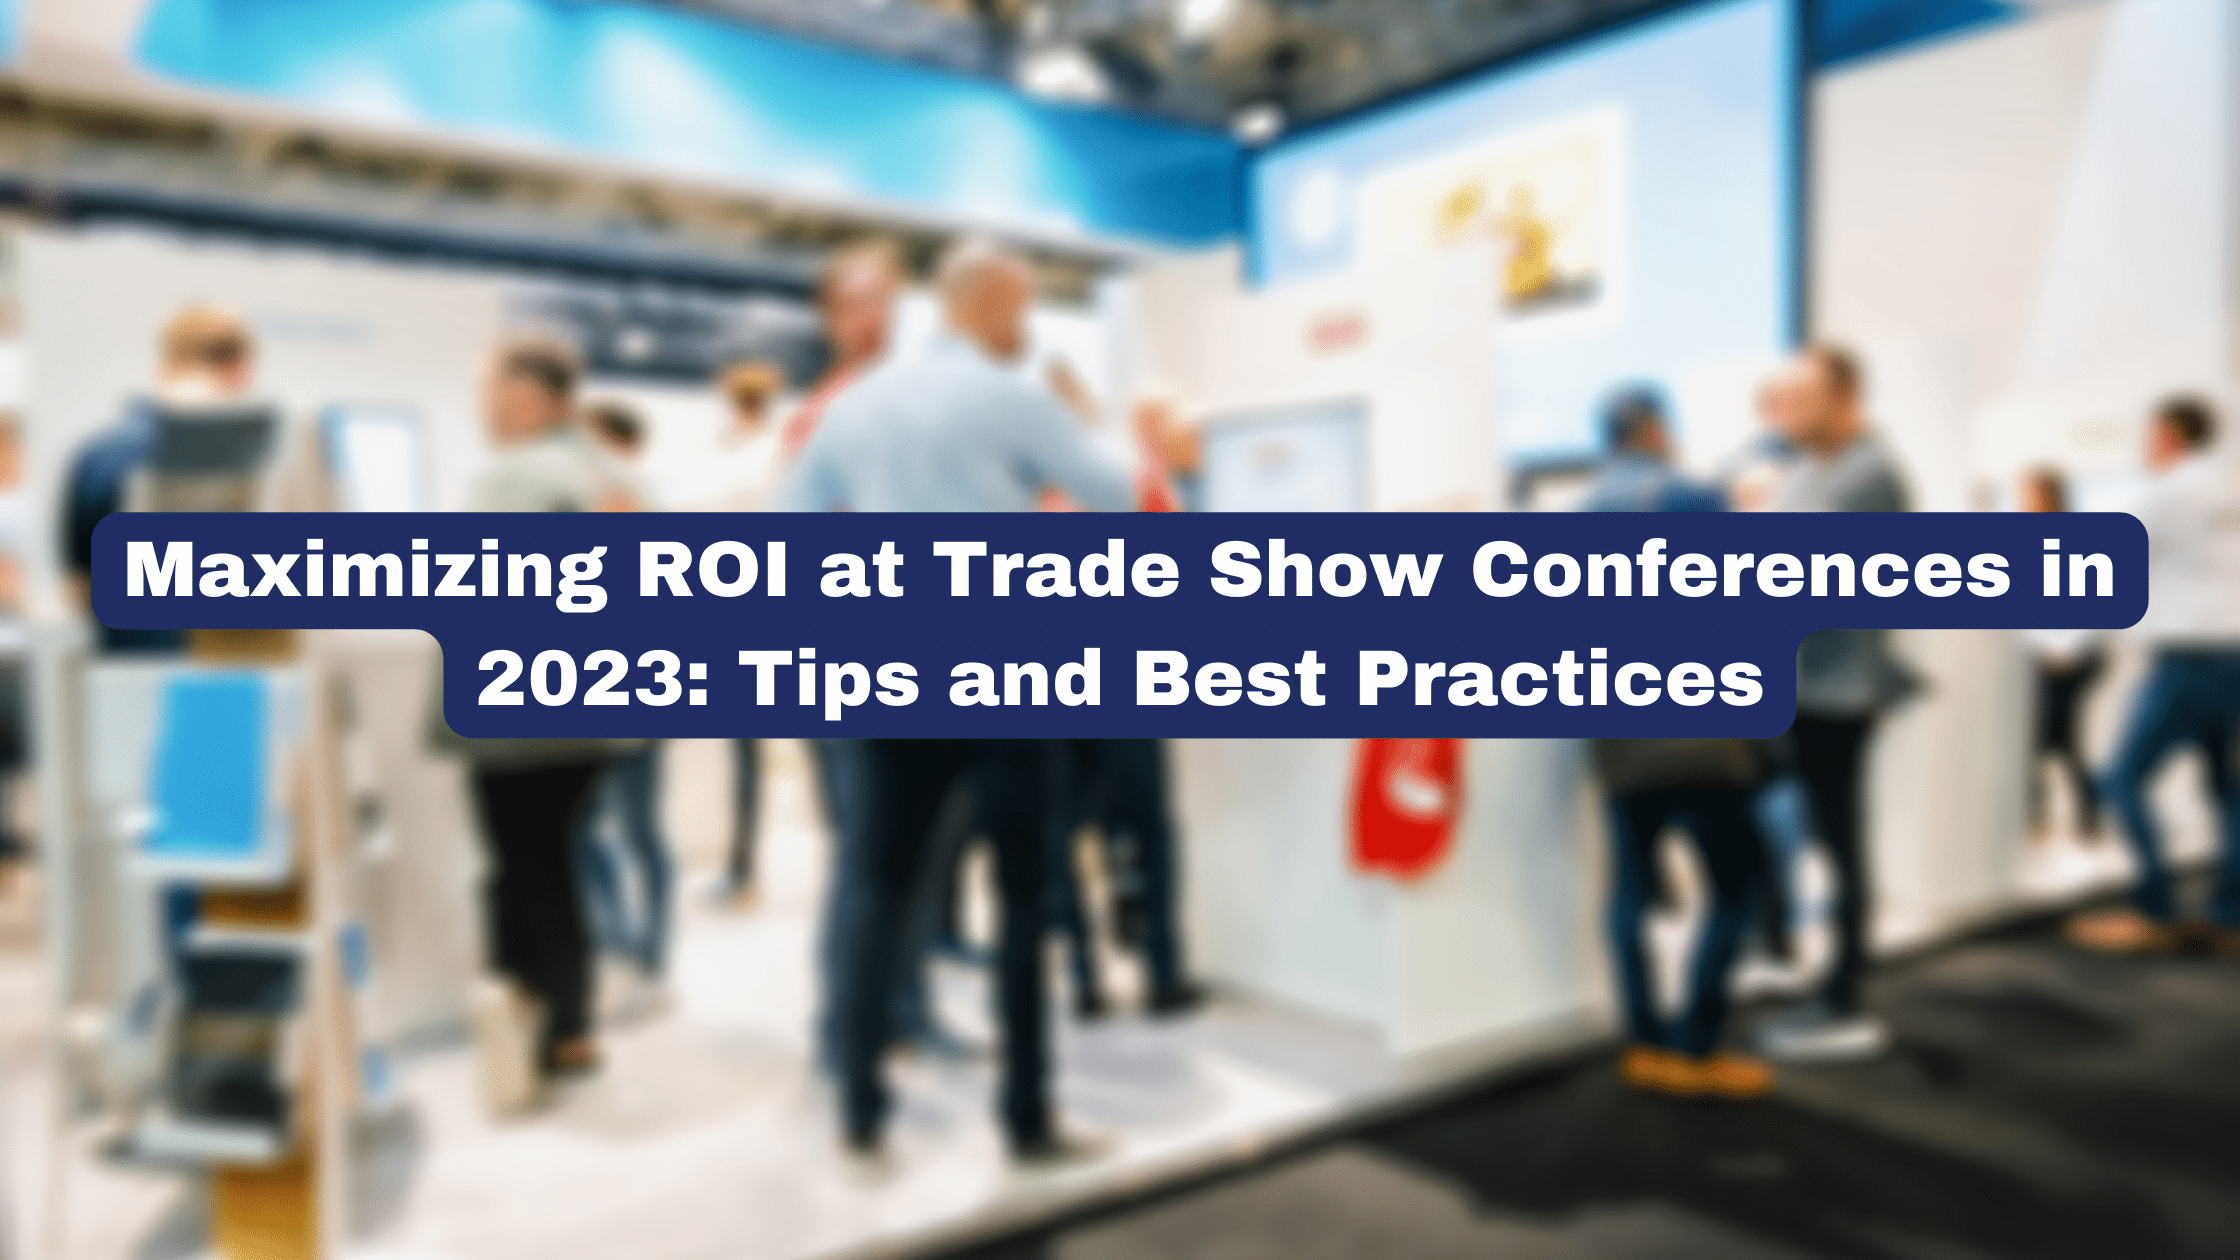 Maximizing ROI at Trade Show Conferences in 2023: Tips and Best Practices cover photo